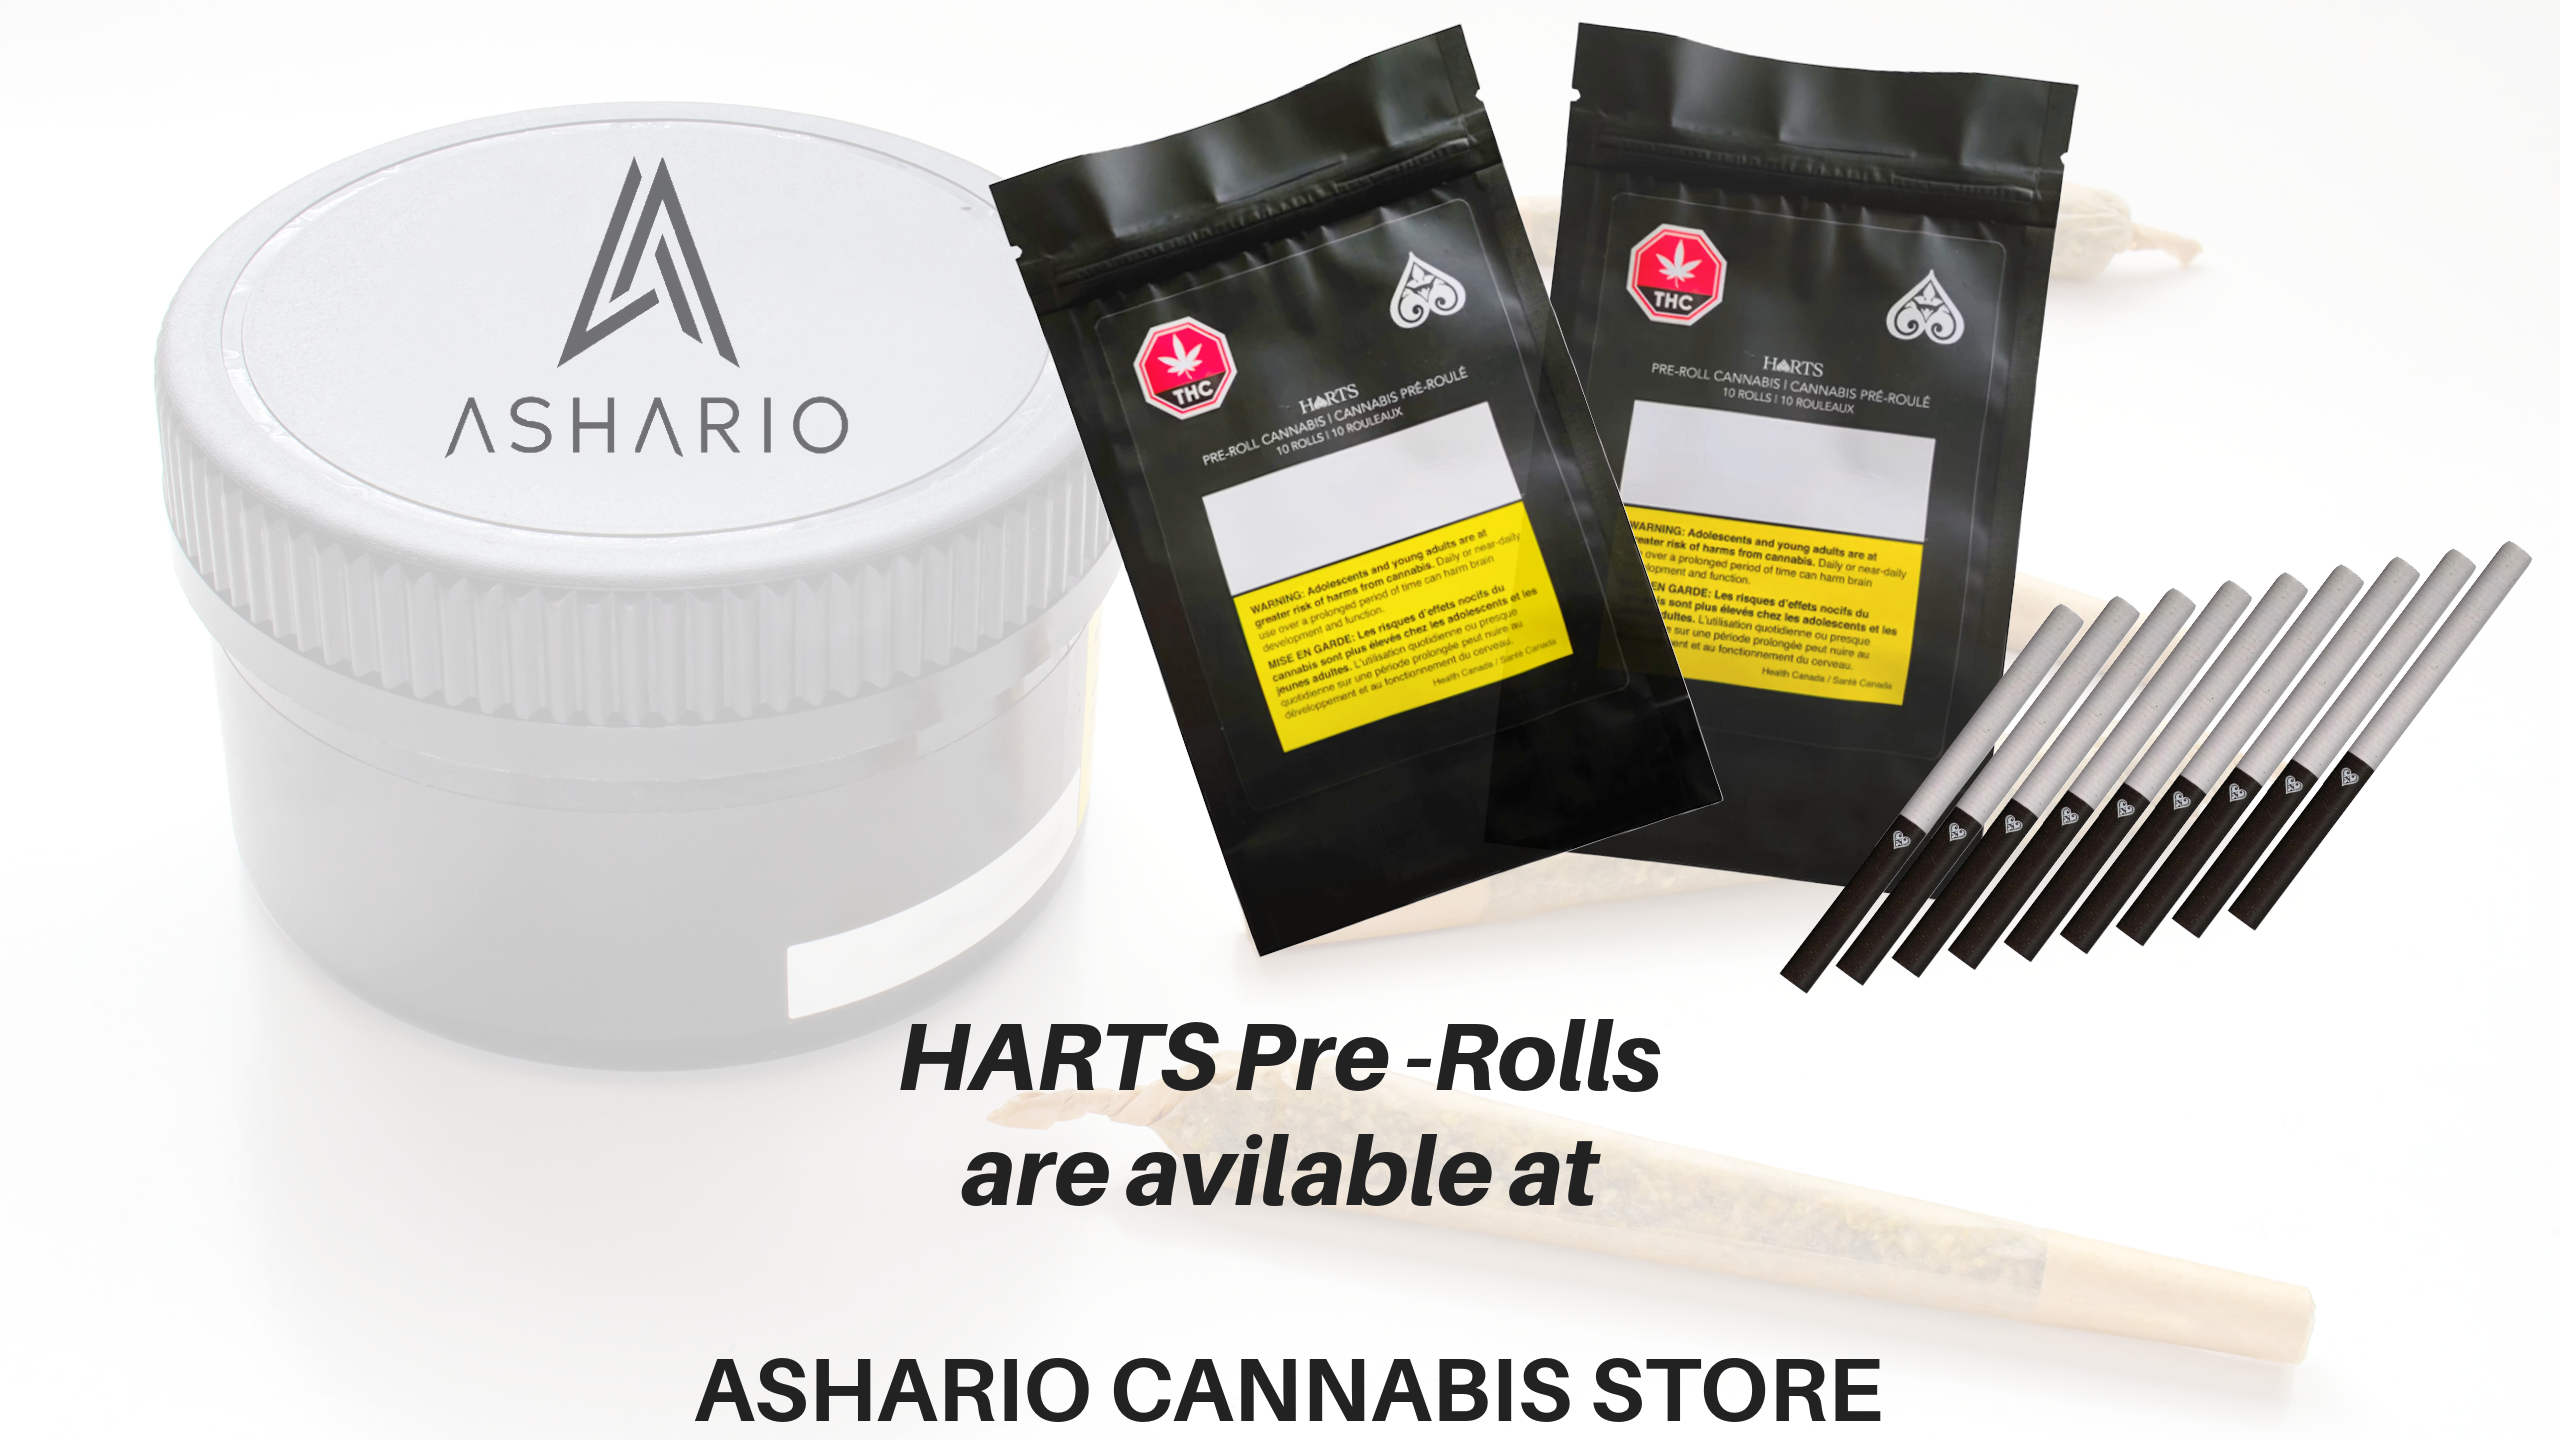 Discover the Magic of Harts Pre-Roll Packs